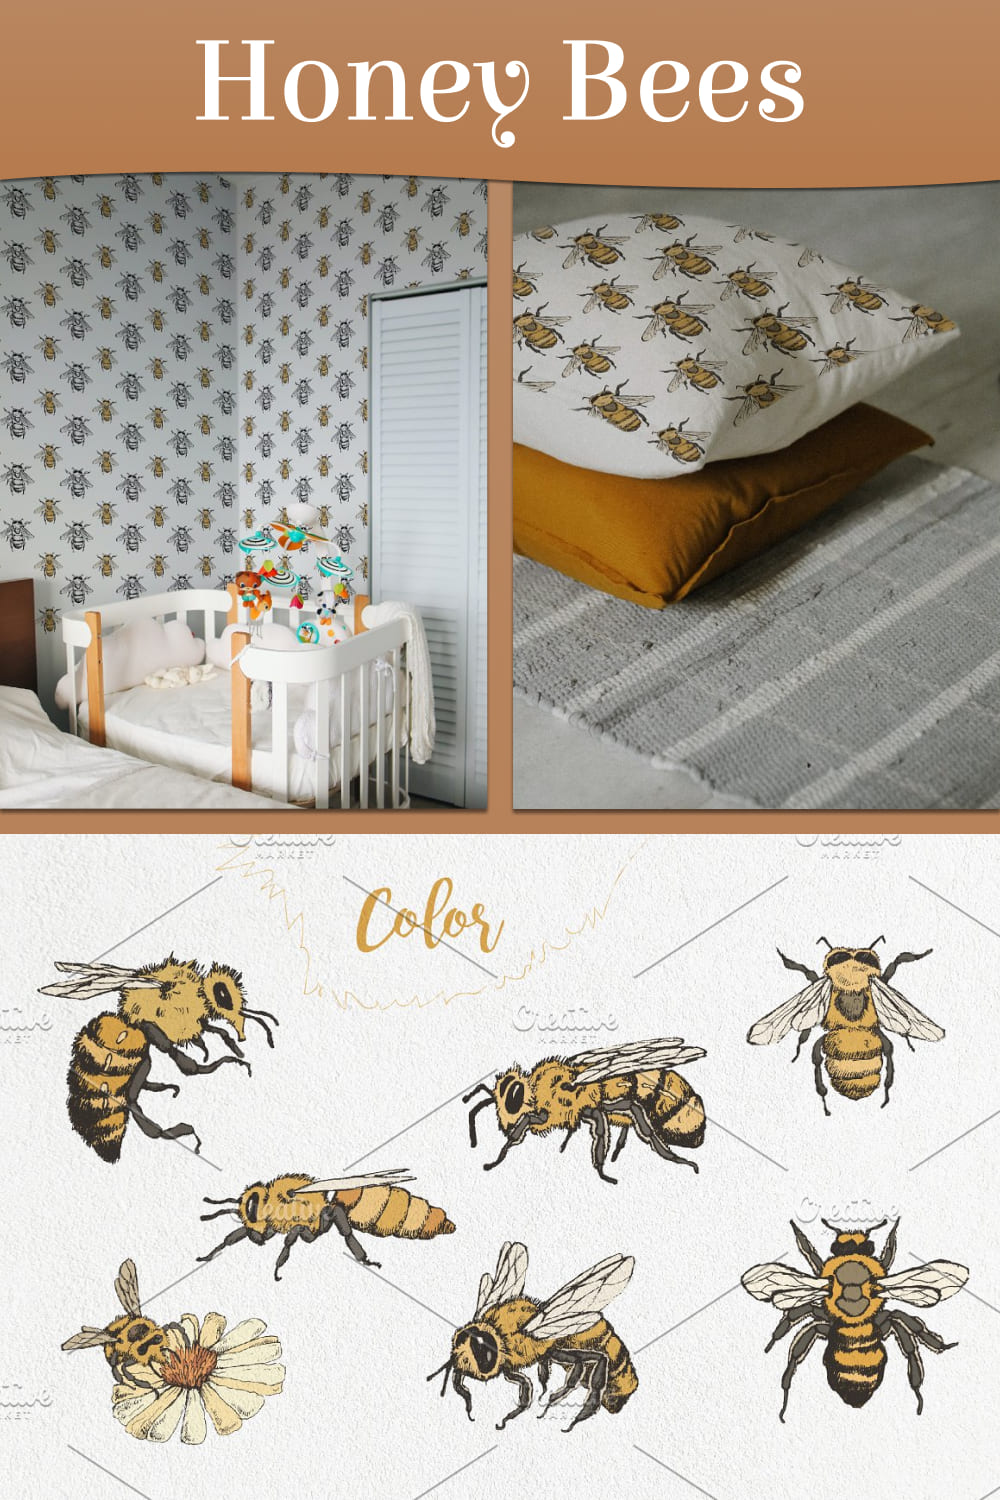 Honey bees - pinterest image preview.